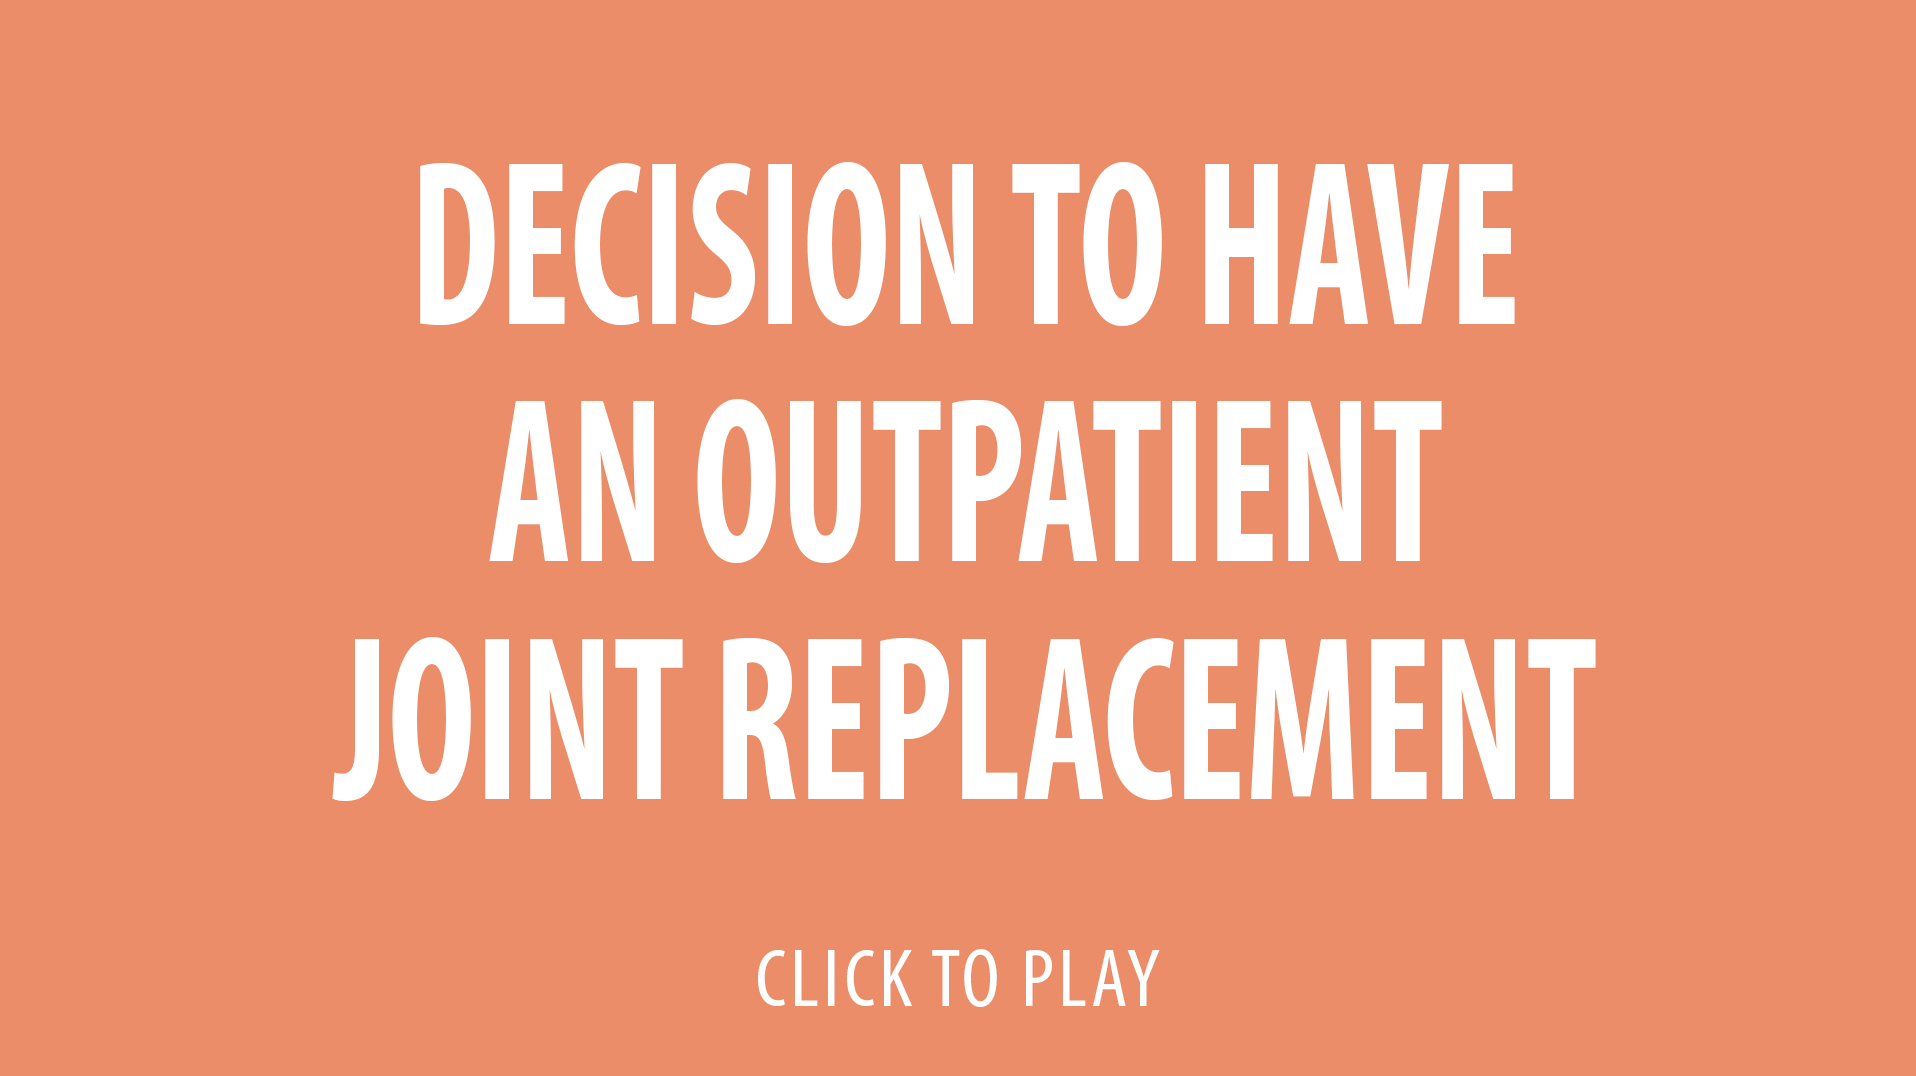 video-thumb-decision-to-have-an-outpatient-joint-replacement